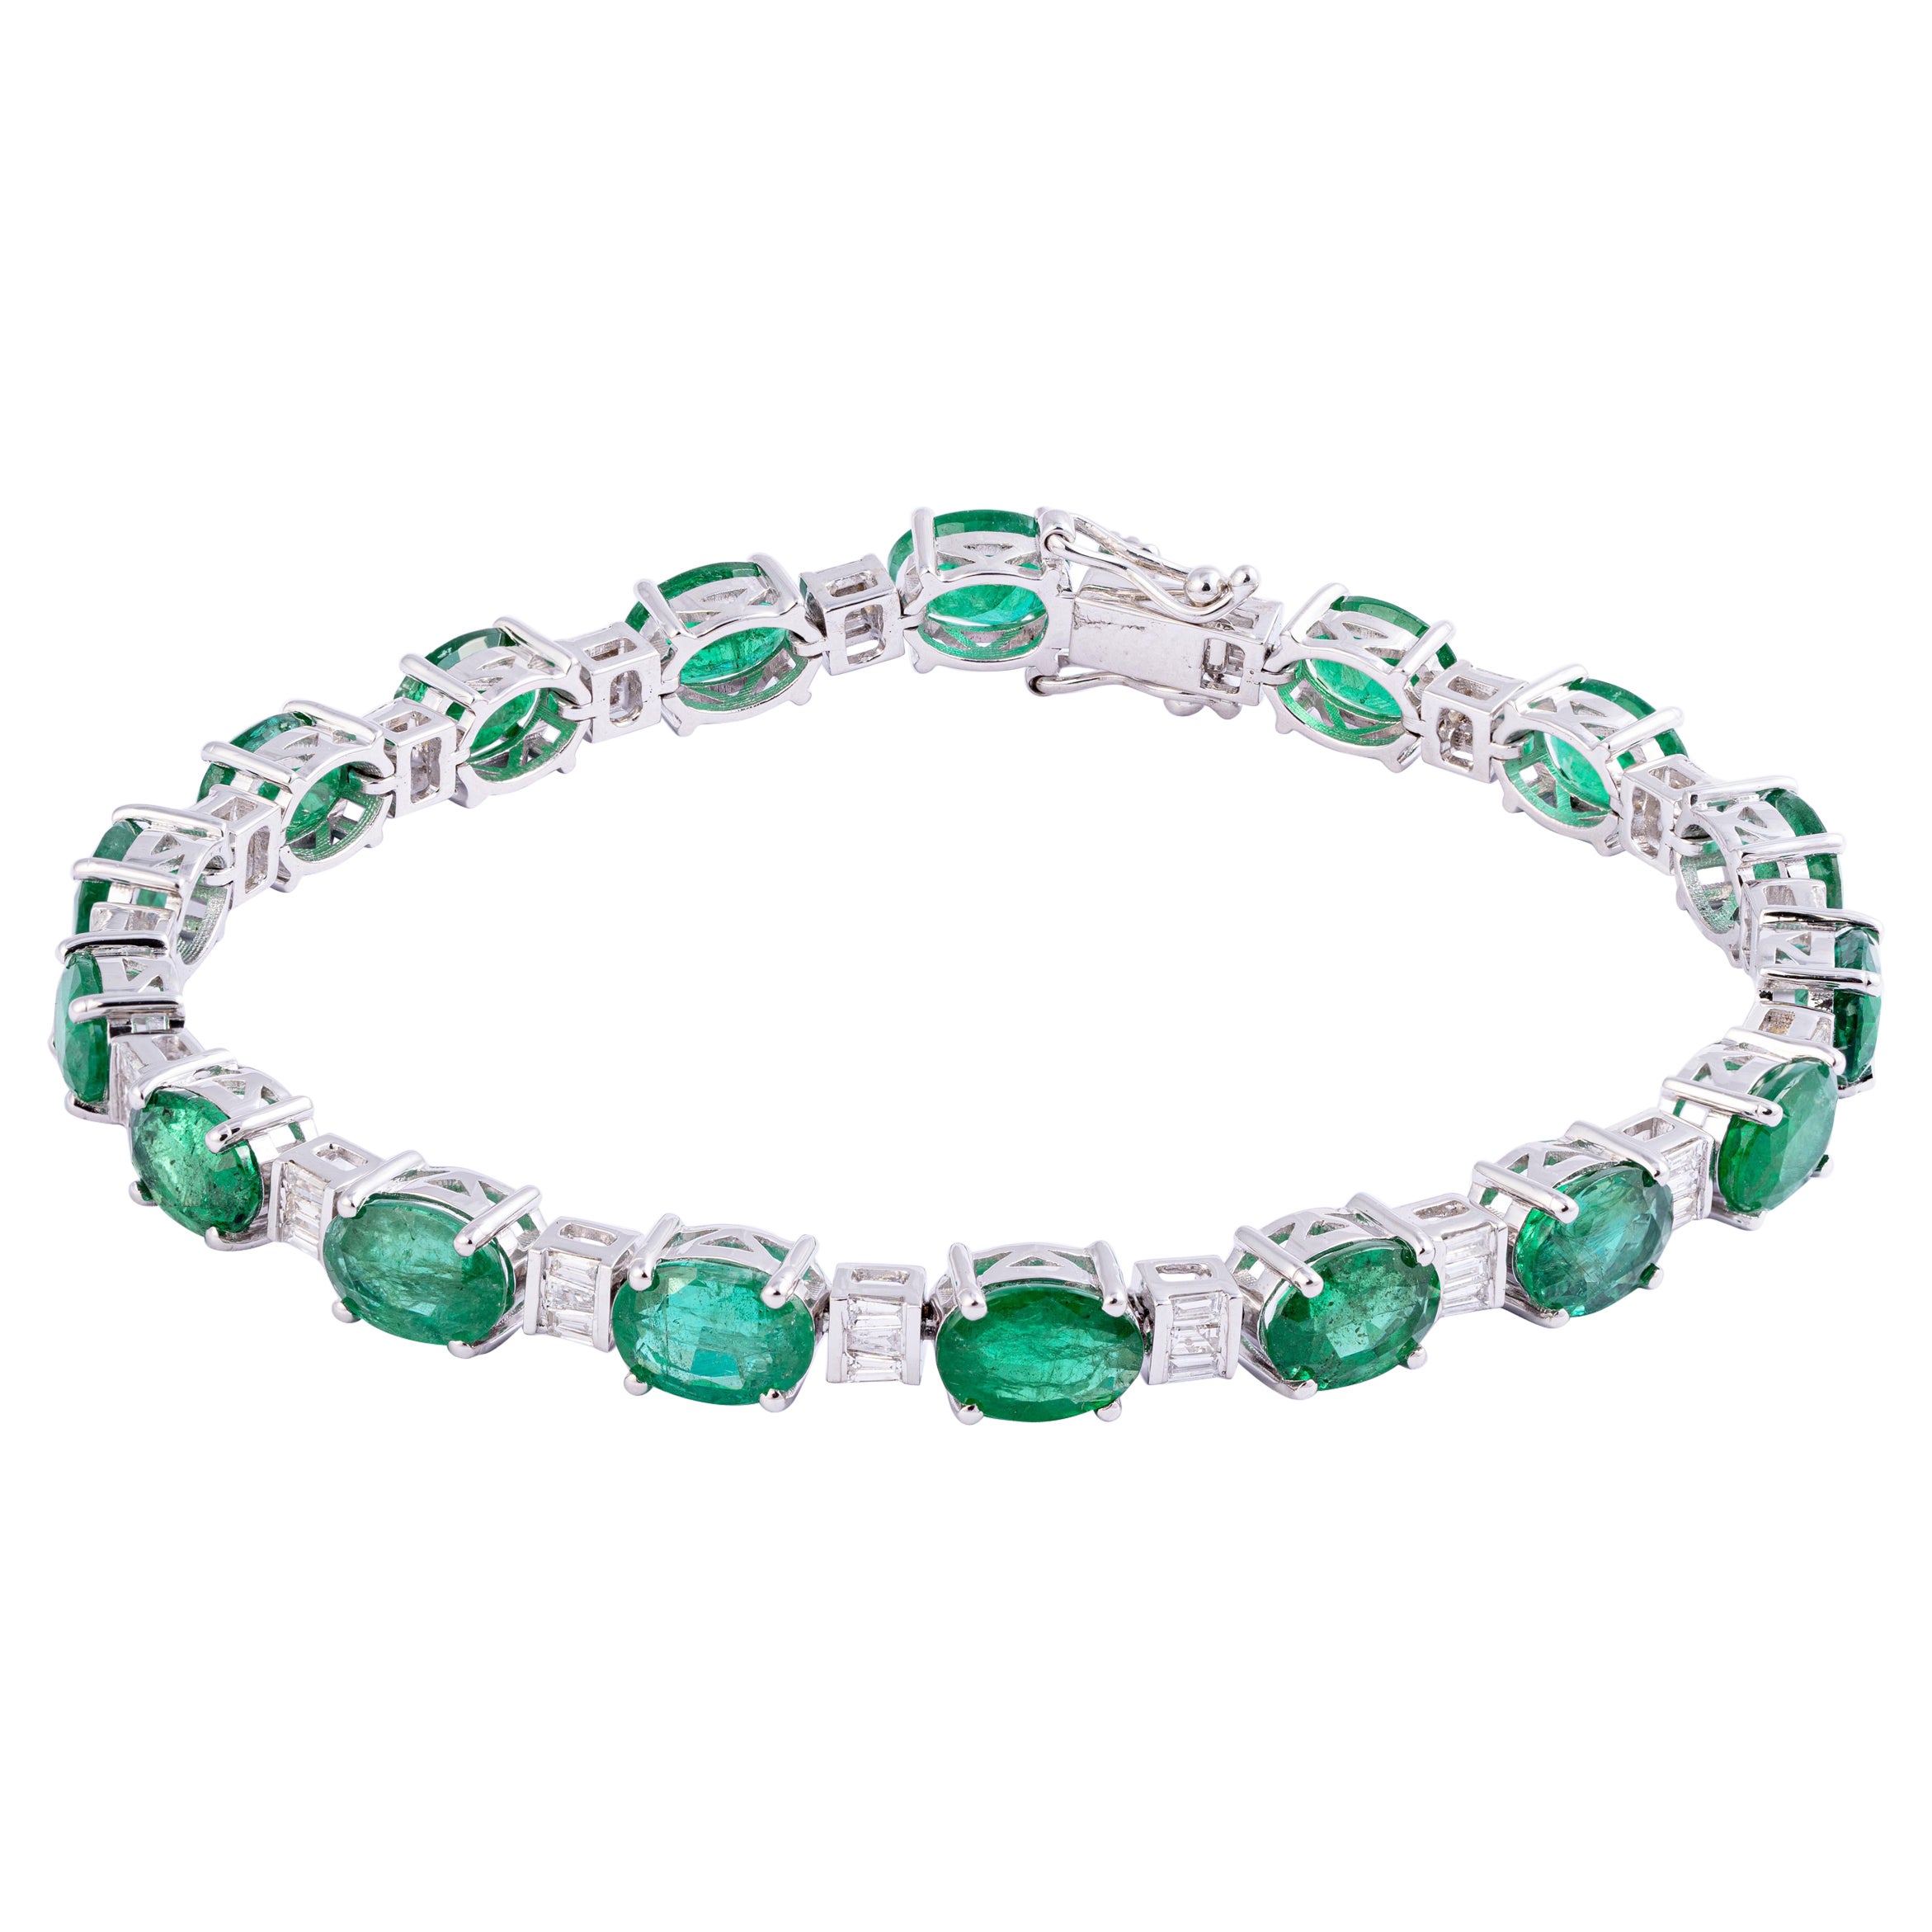  Zambian Emerald 13.06cts Tennis Bracelet with Diamonds 0.74cts and 14k Gold